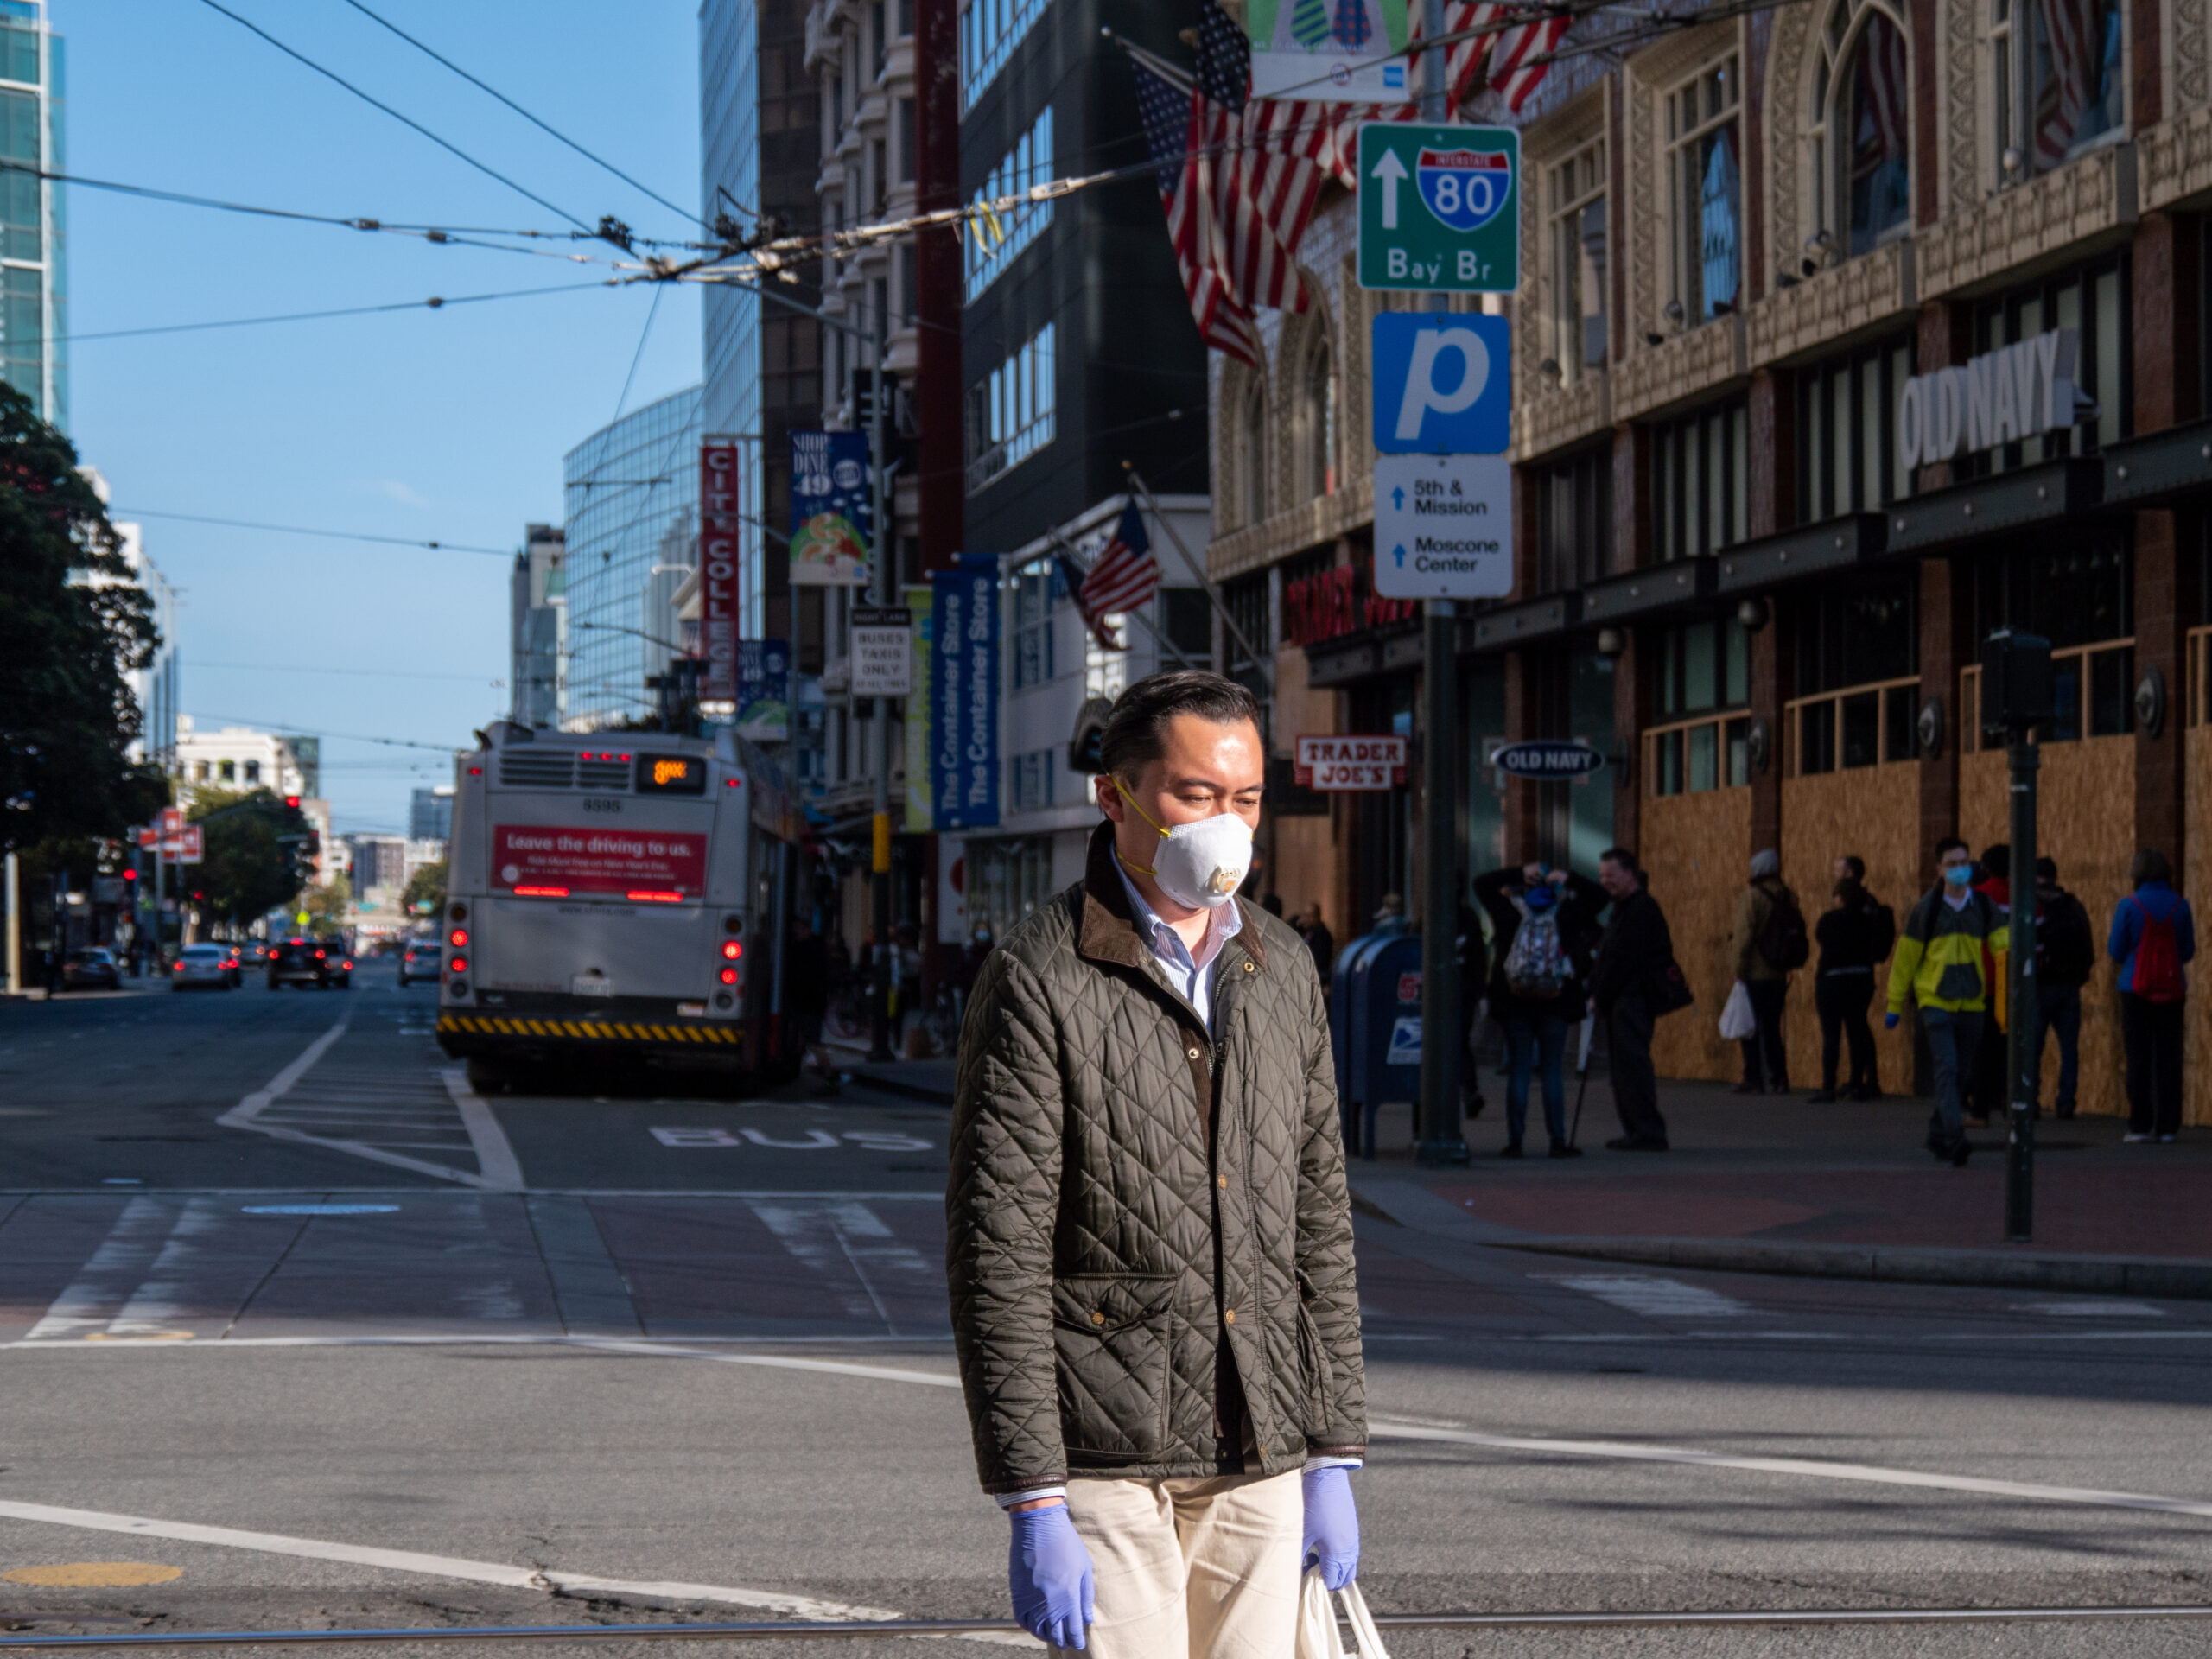 A man crosses Market Street in San Francisco last April during the pandemic. Photo by Philip Wyers / iStock